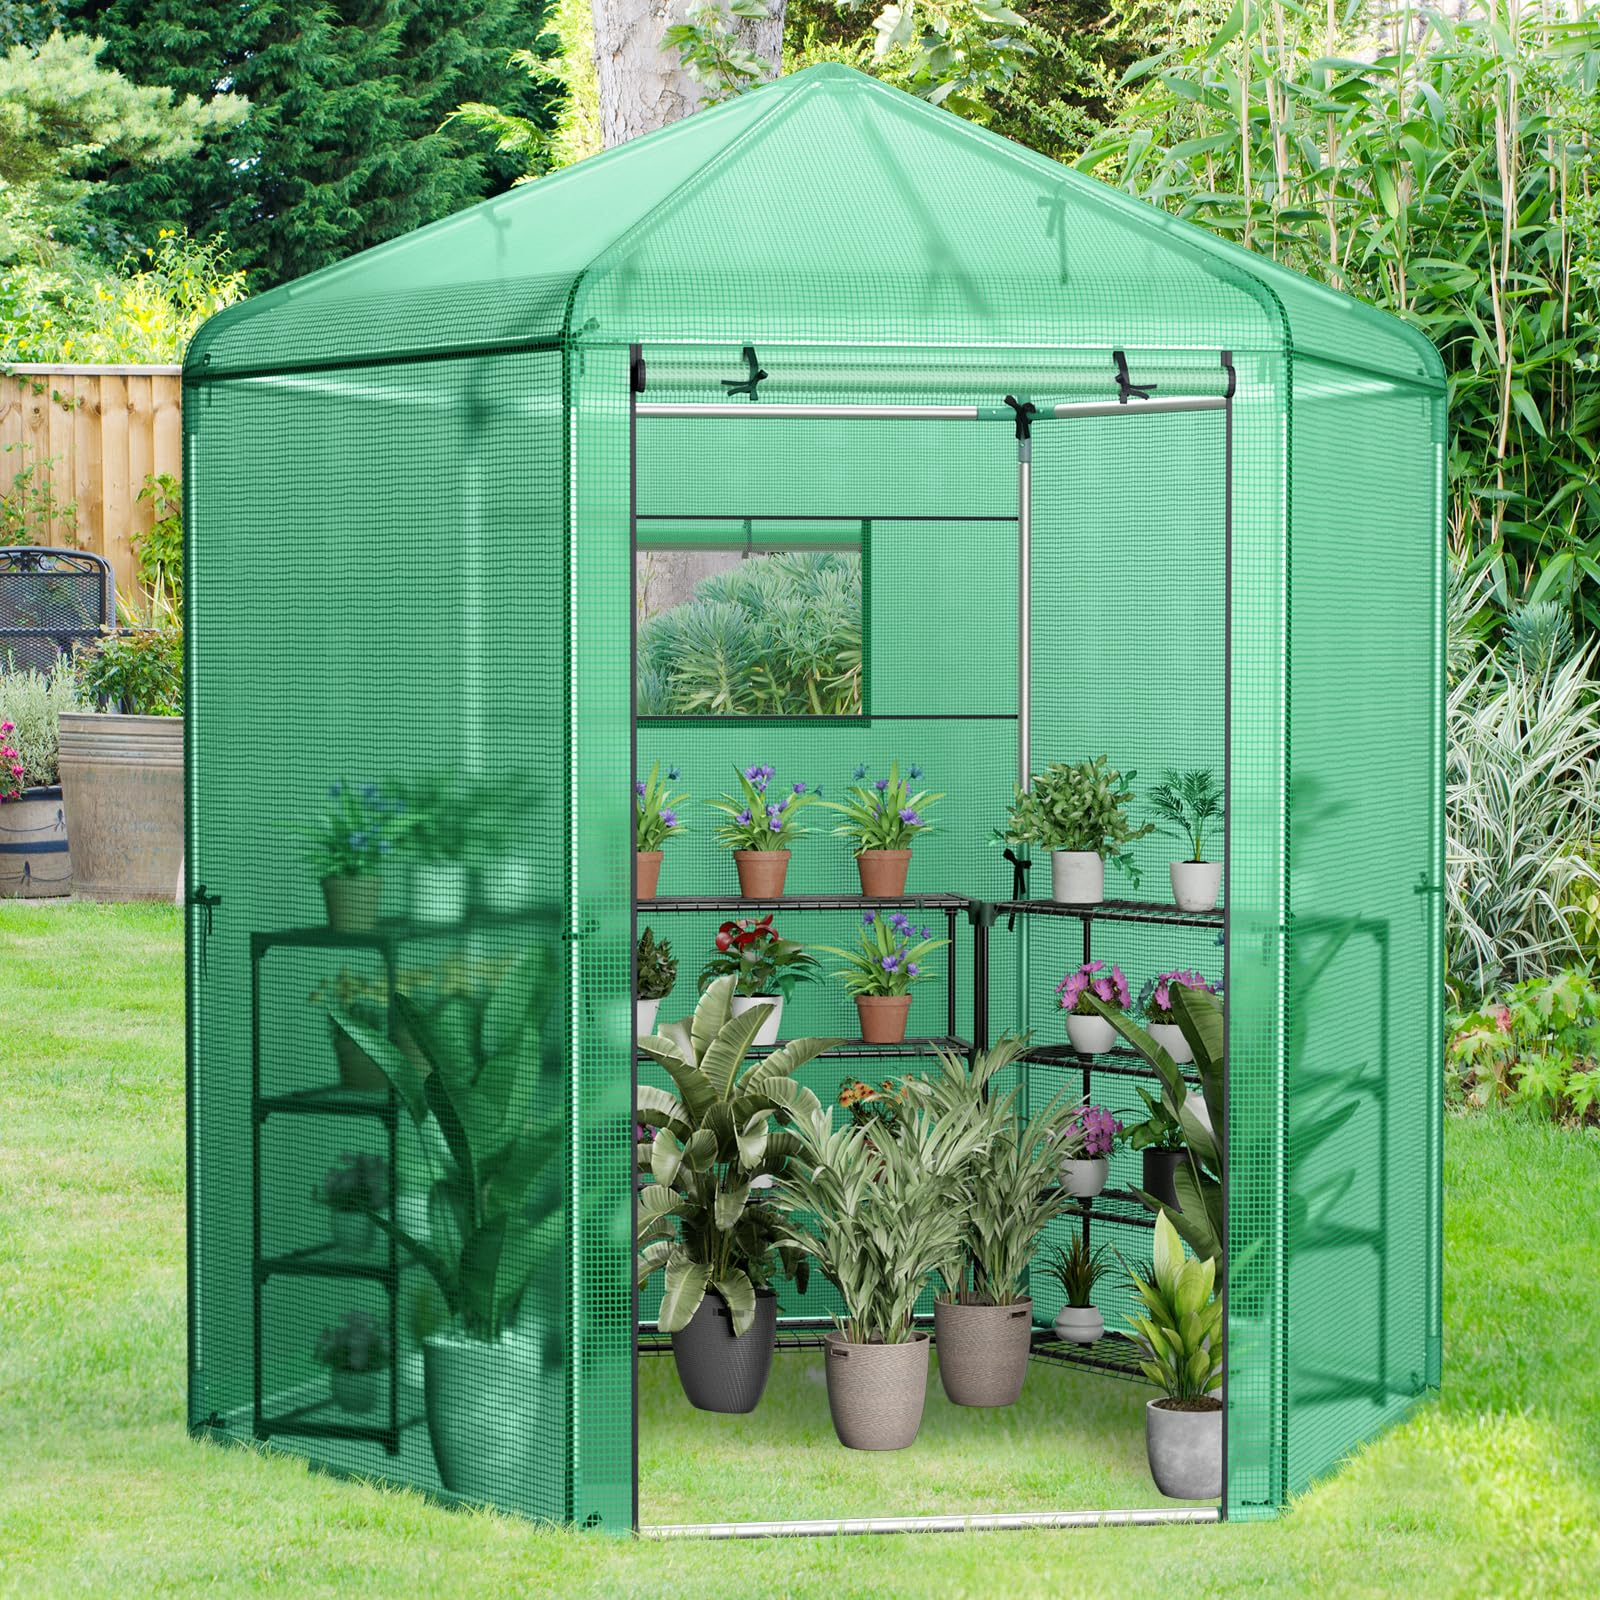 Giantex 7 x 6 x 7.5 FT Greenhouse, Large Hexagonal Walk in Greenhouse Outdoor with Heavy-Duty Metal Frame